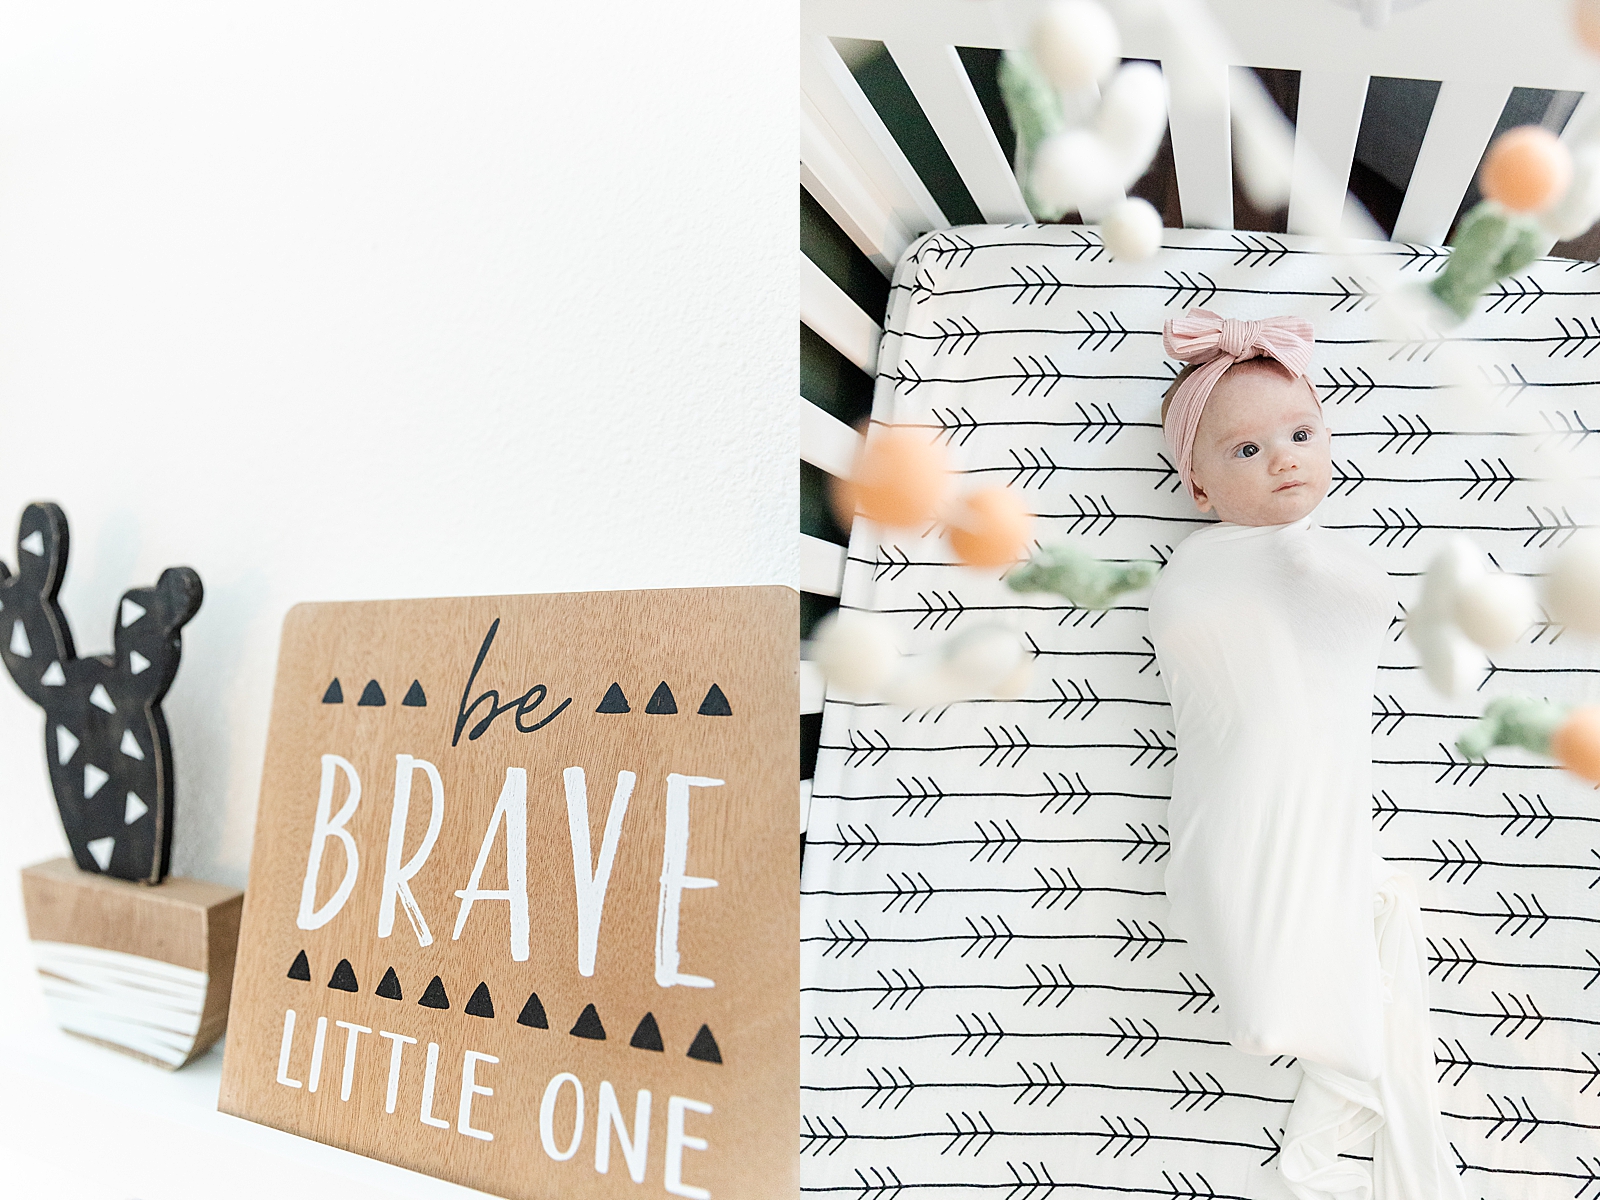 Lifestyle Newborn Photos be brave little one nursery decoration and baby swaddled in crib looking up at cactus mobile